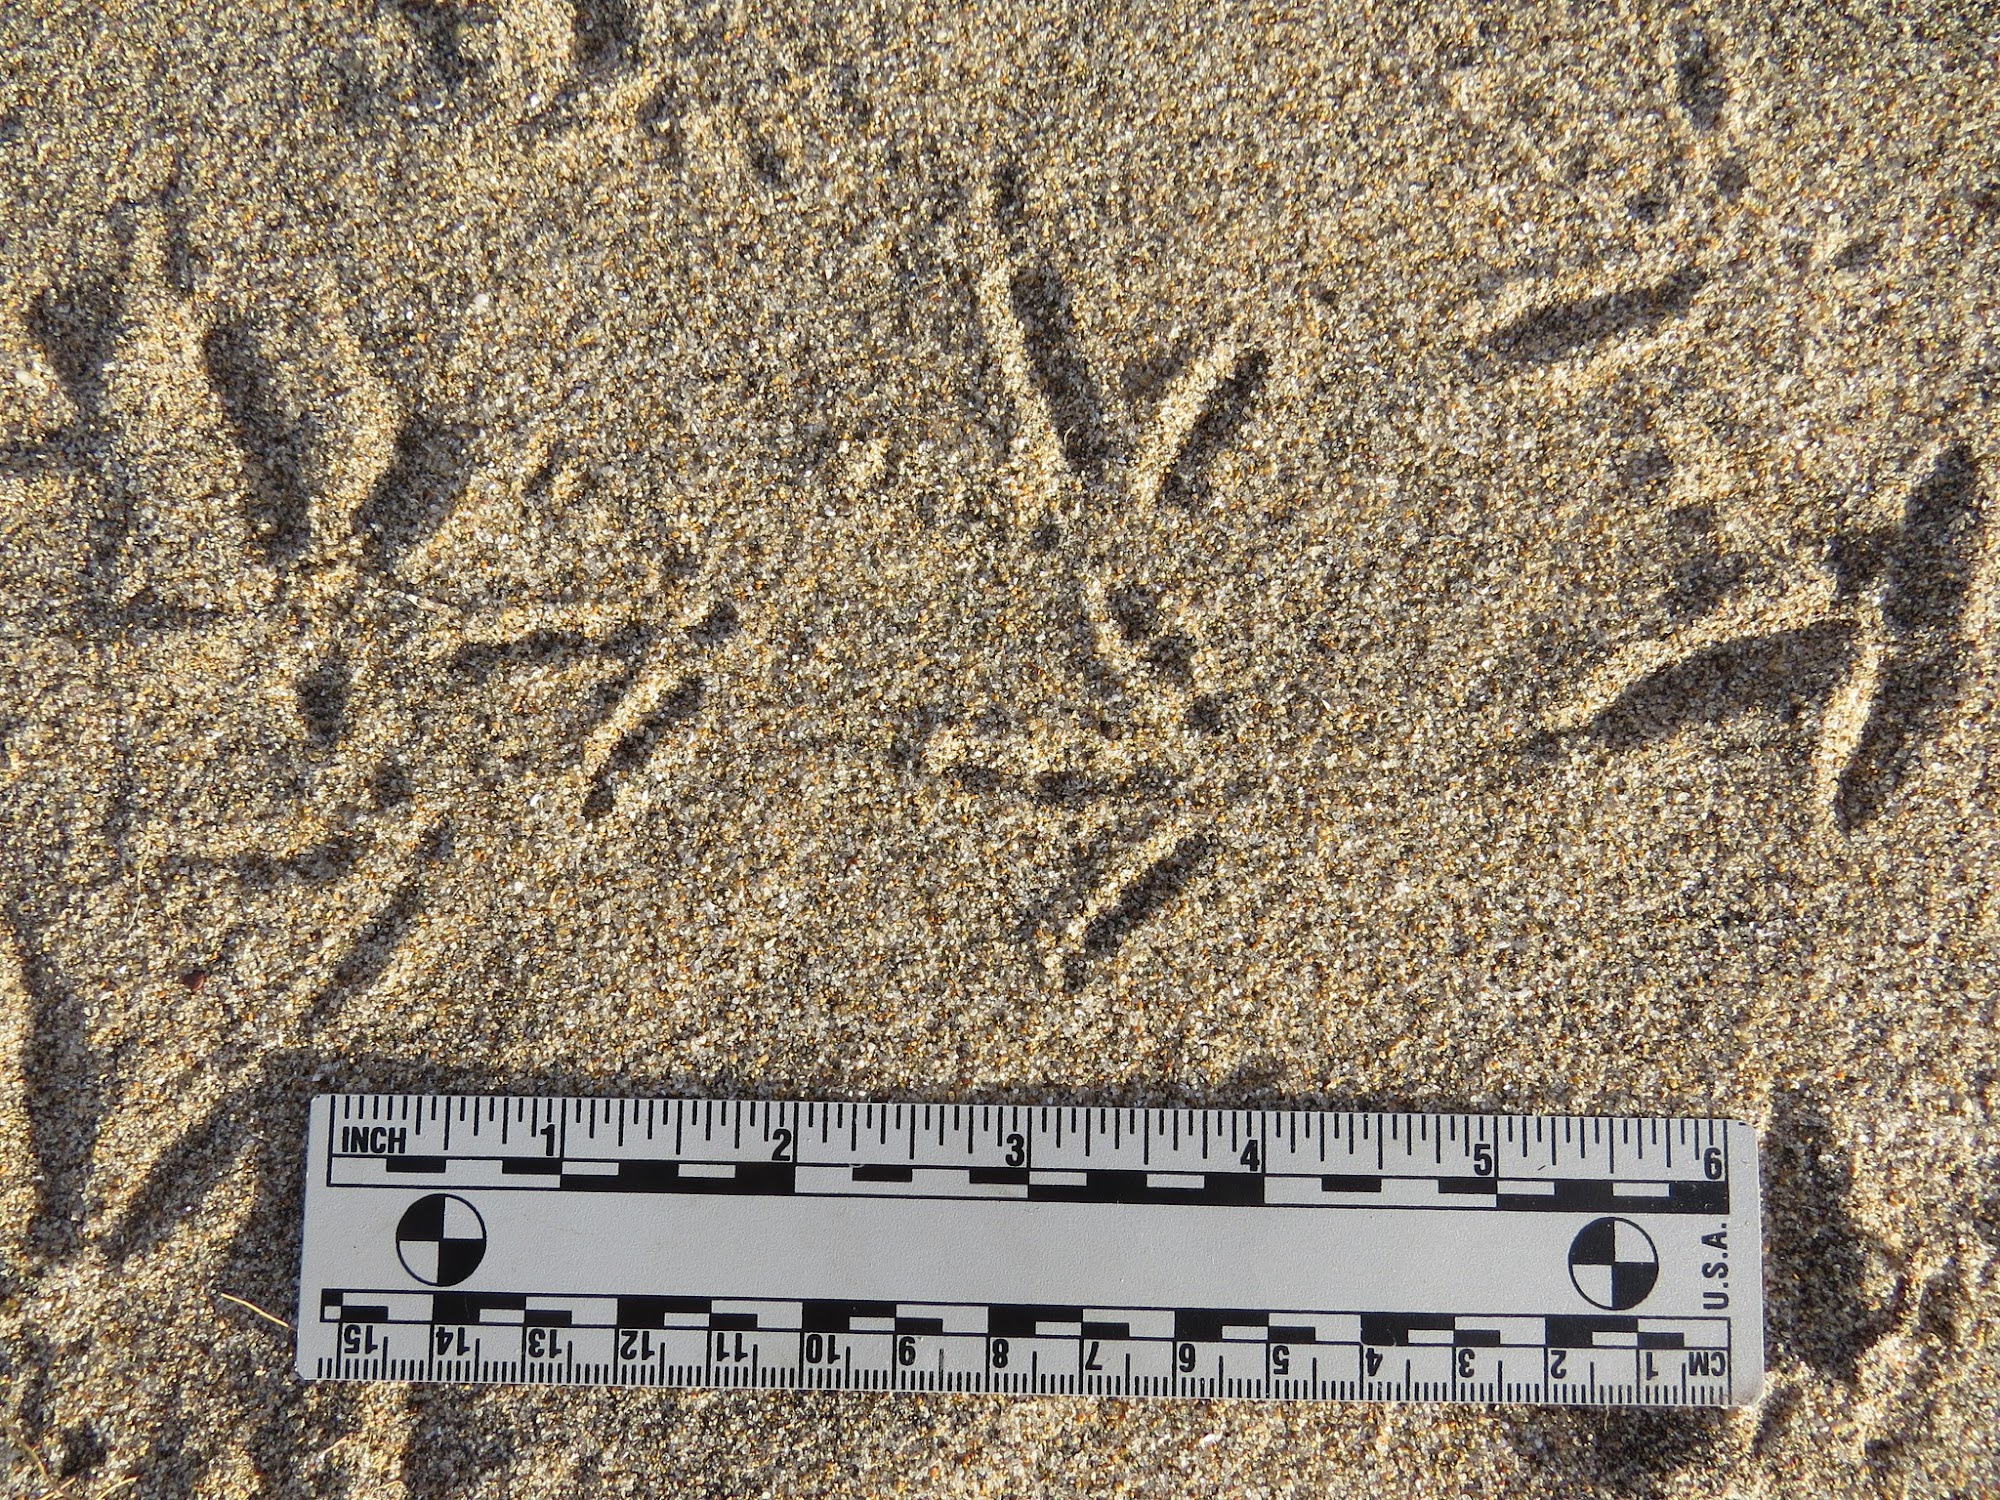 A set of quail tracks show up in sand.